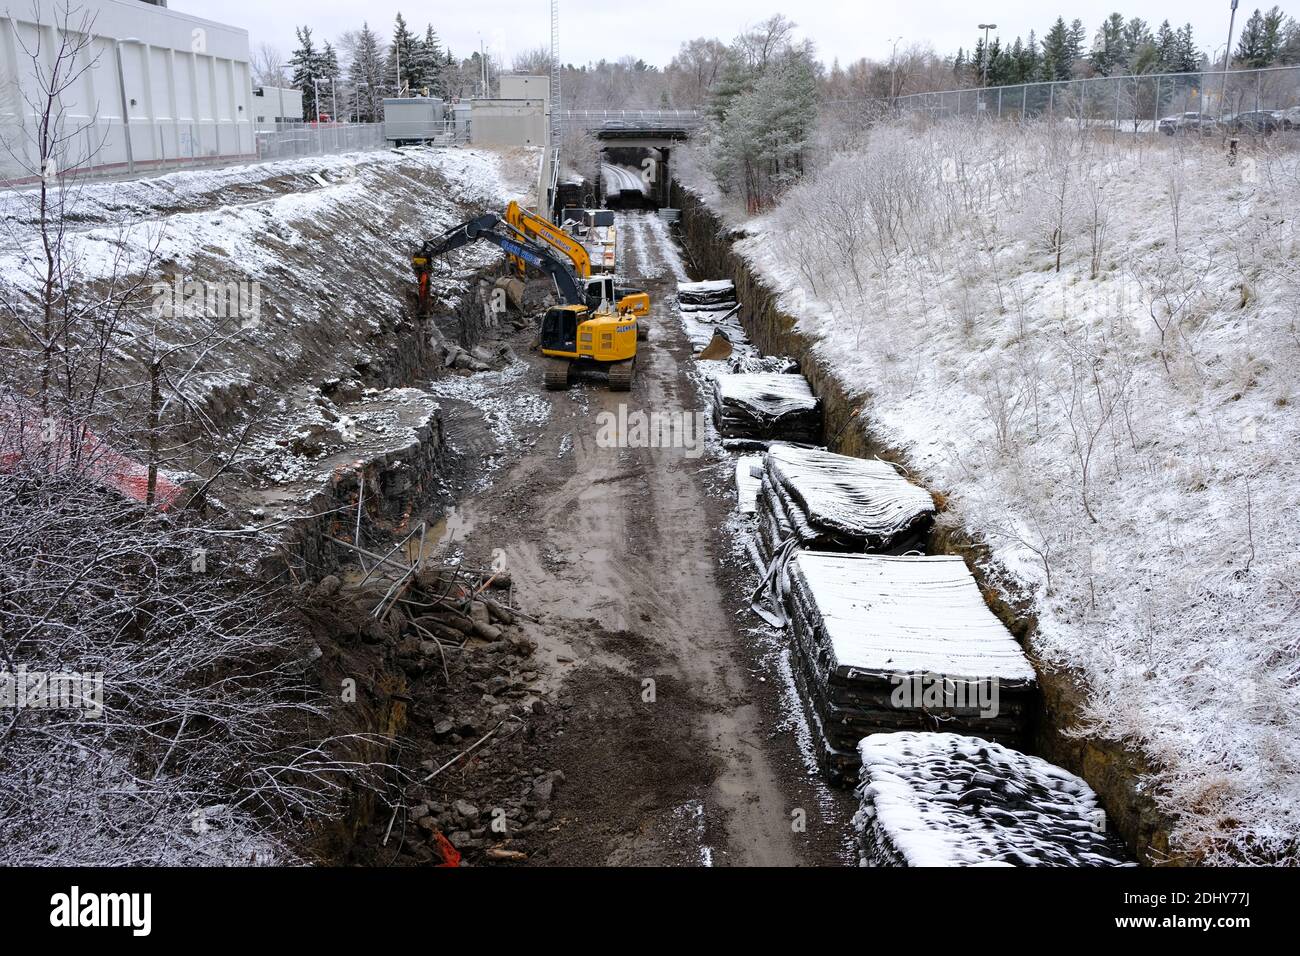 Under ballast mats and a digger widening the tracks for the Trillium line light rail upgrade/expansion at Carling Station, Ottawa, Ontario, Canada. Stock Photo